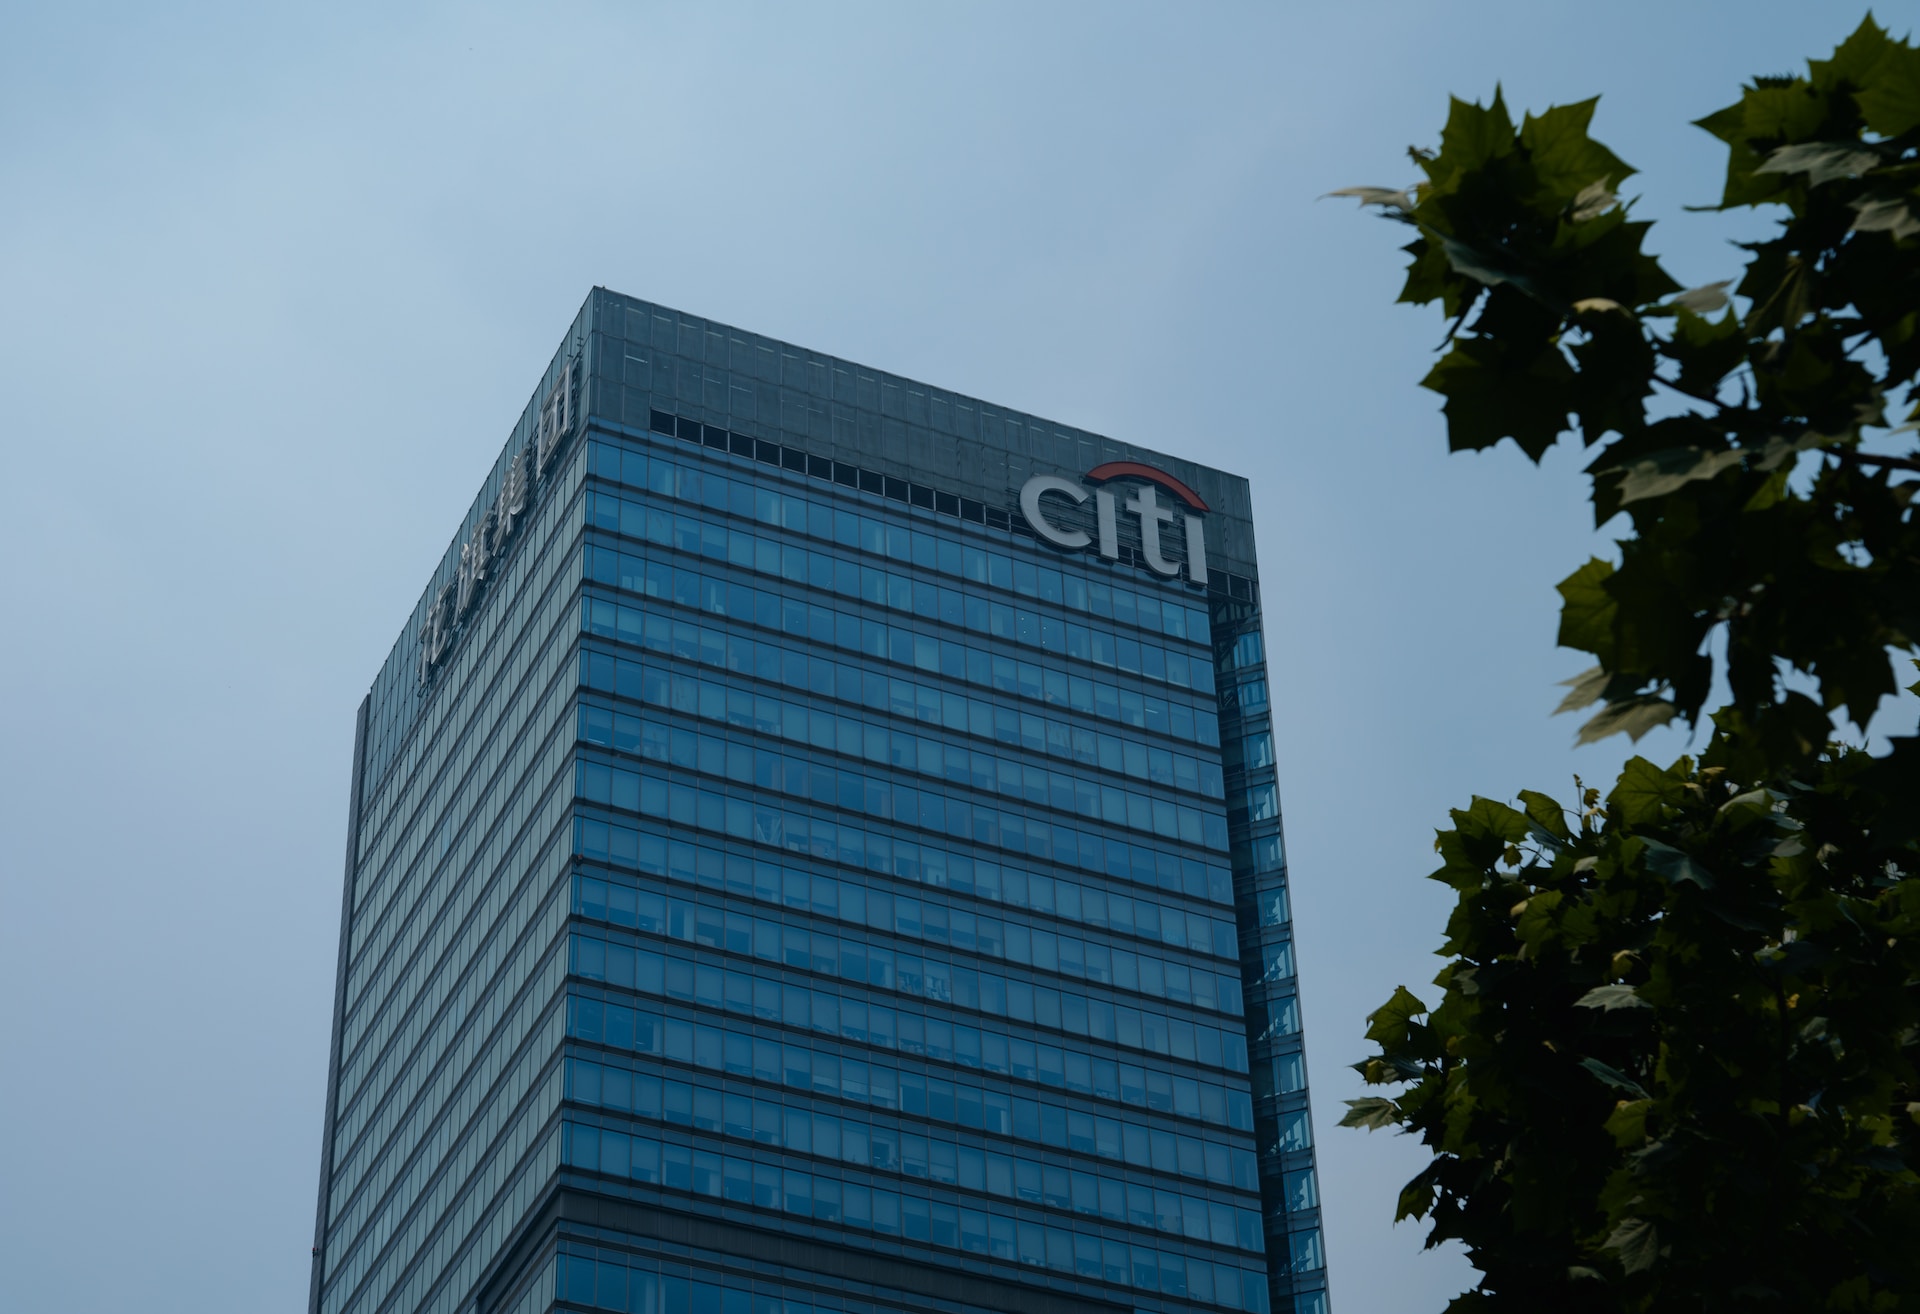 15 Facts About Citi - Facts.net